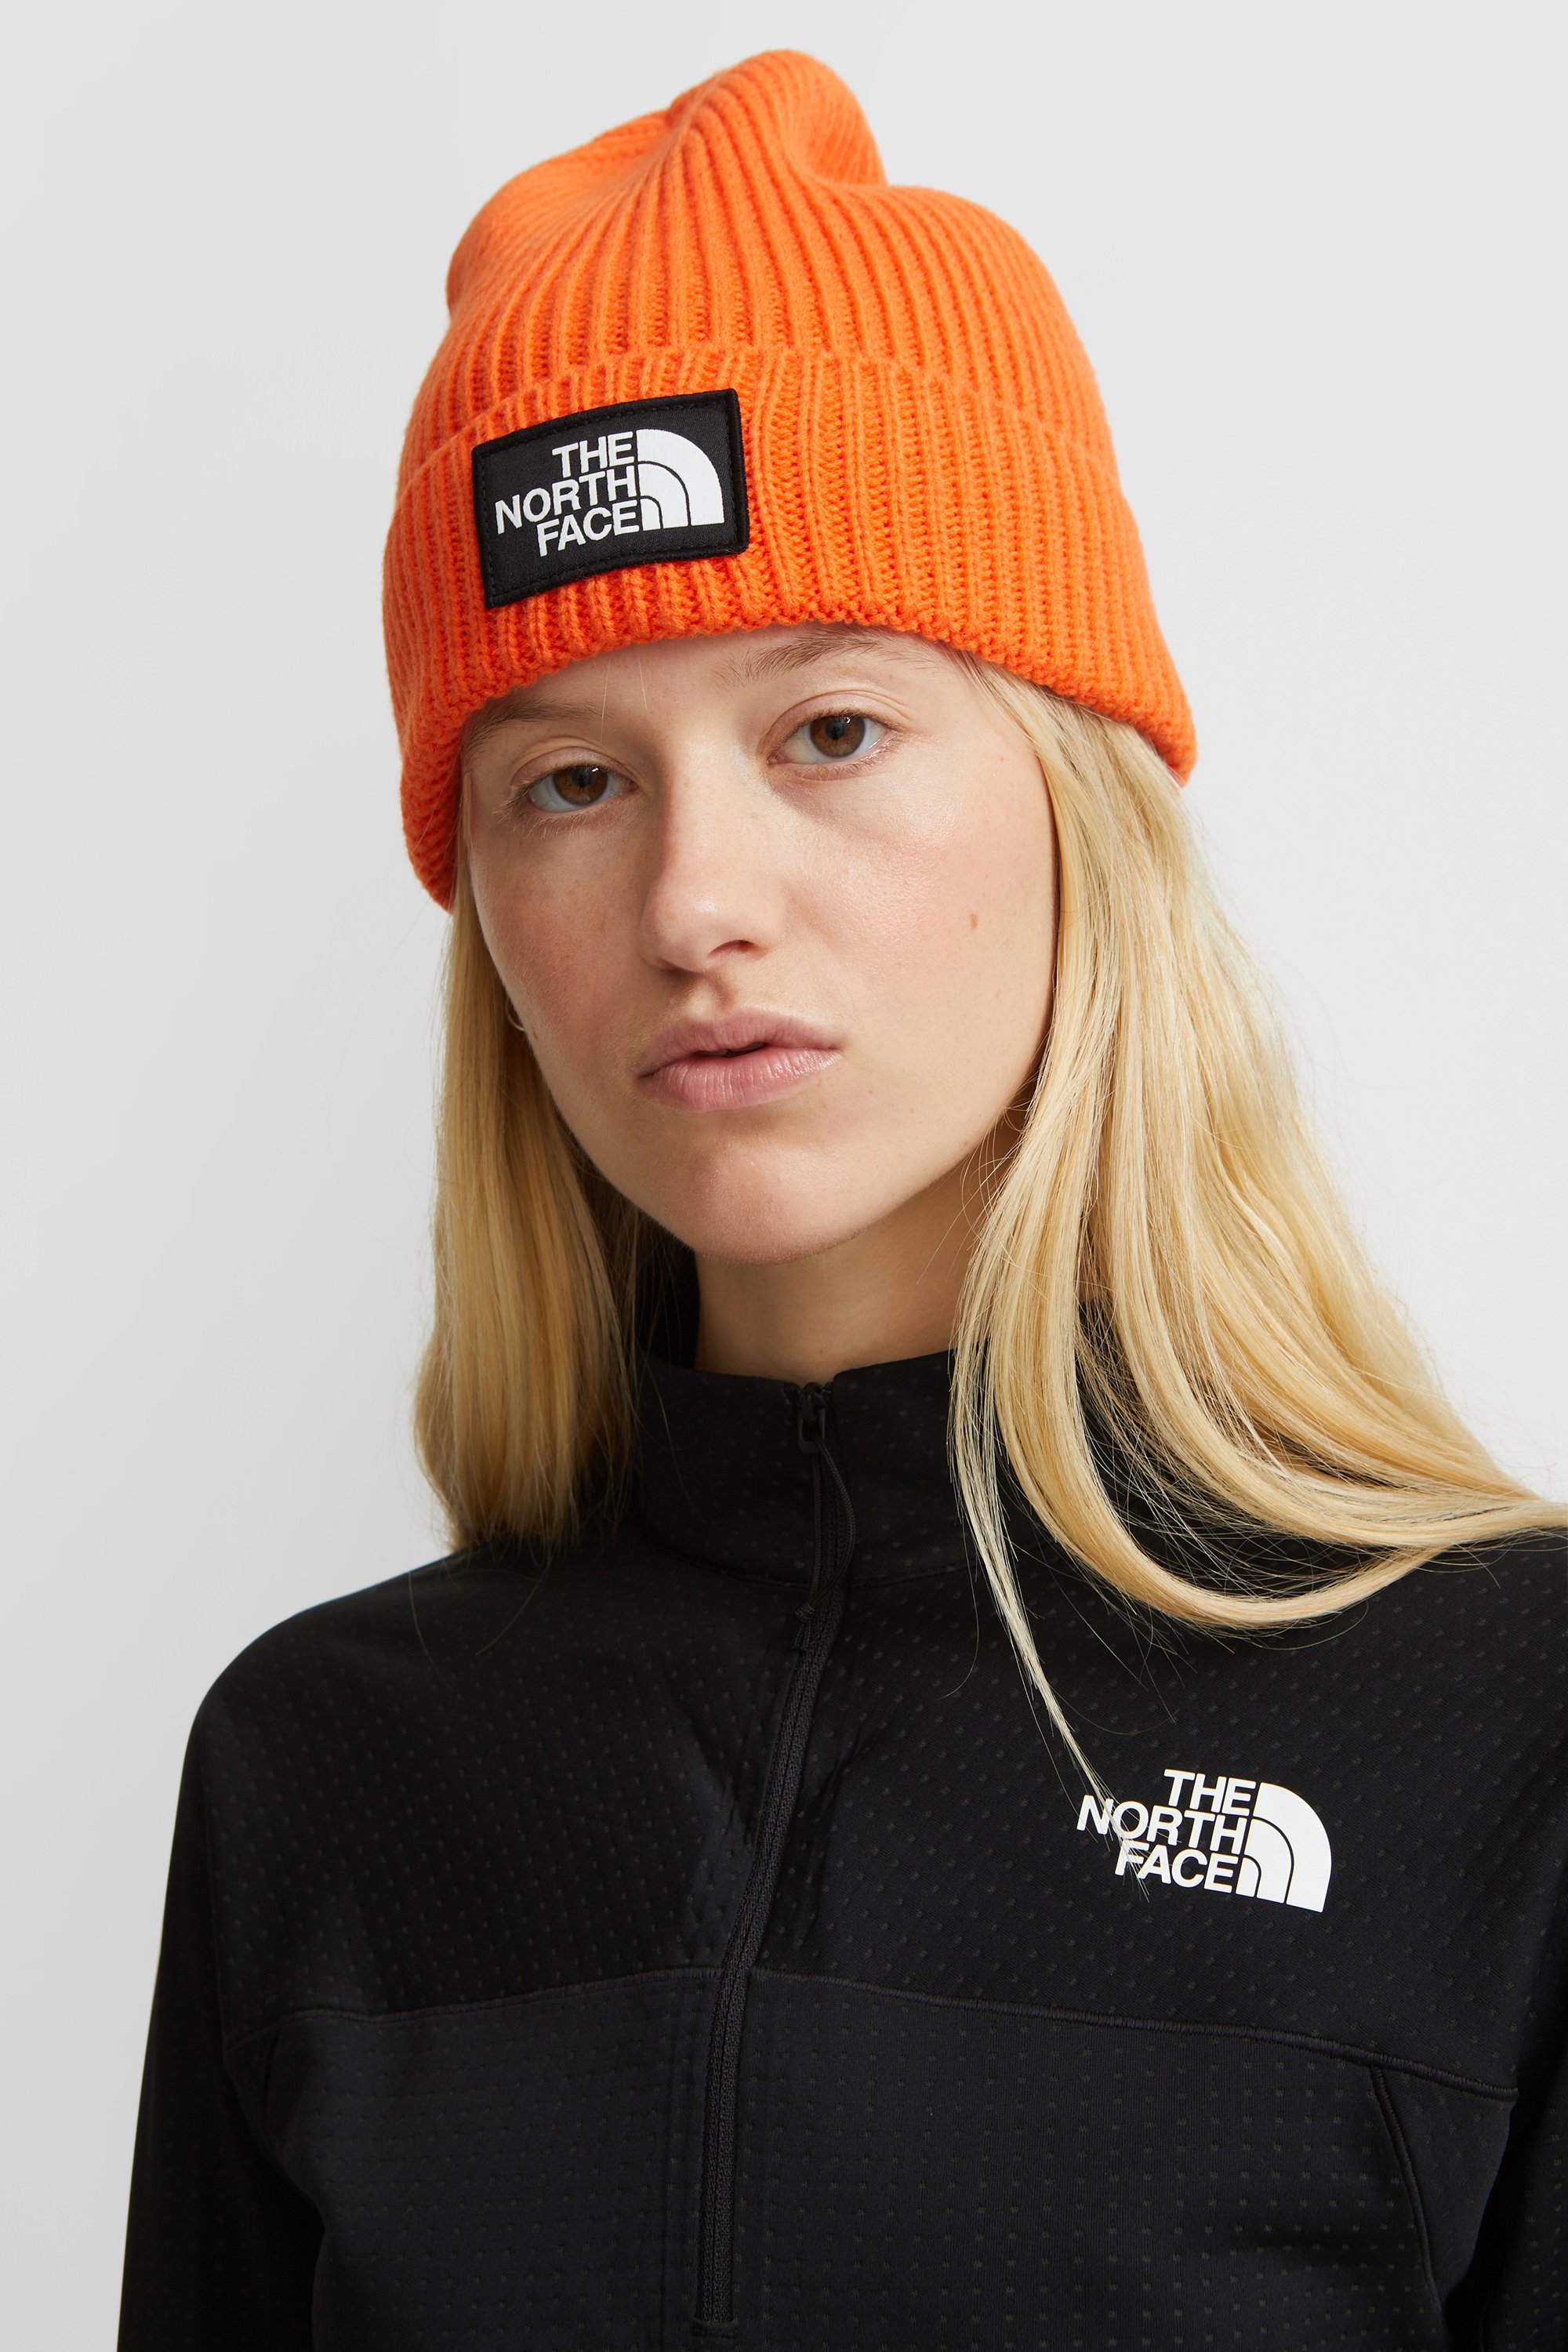 The North Face Logo Box Cuff Beanie Online Offers, Save 45% | jlcatj.gob.mx